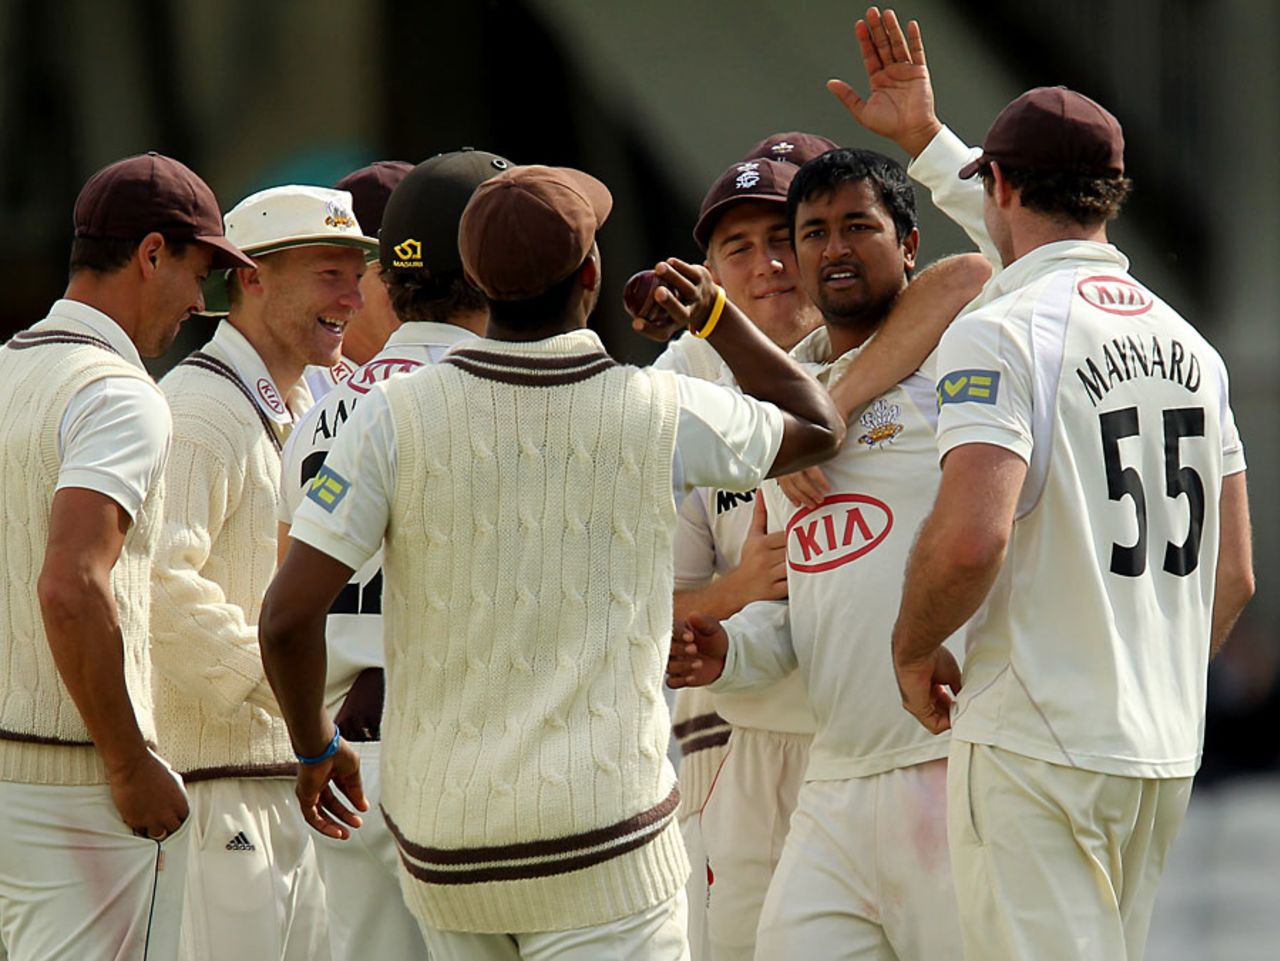 Pragyan Ojha is congratulated on another wicket as Surrey earn promotion, Surrey v Derbyshire, County Championship, Division Two, The Oval, September 14, 2011